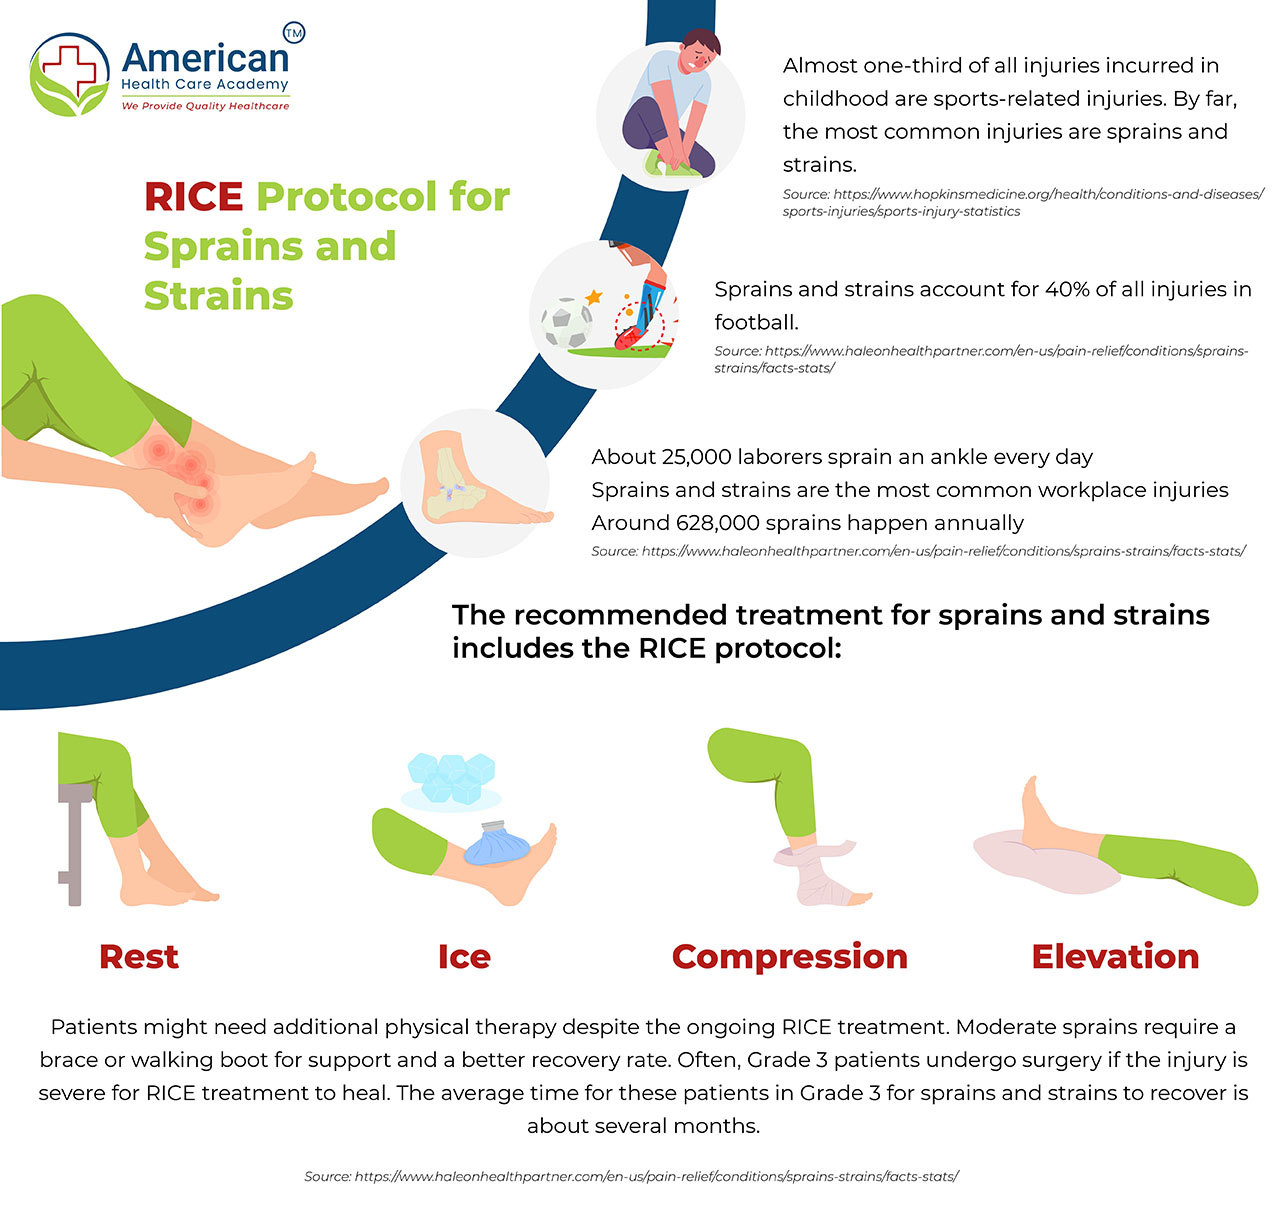 R.I.C.E. Method as First Aid in Injuries